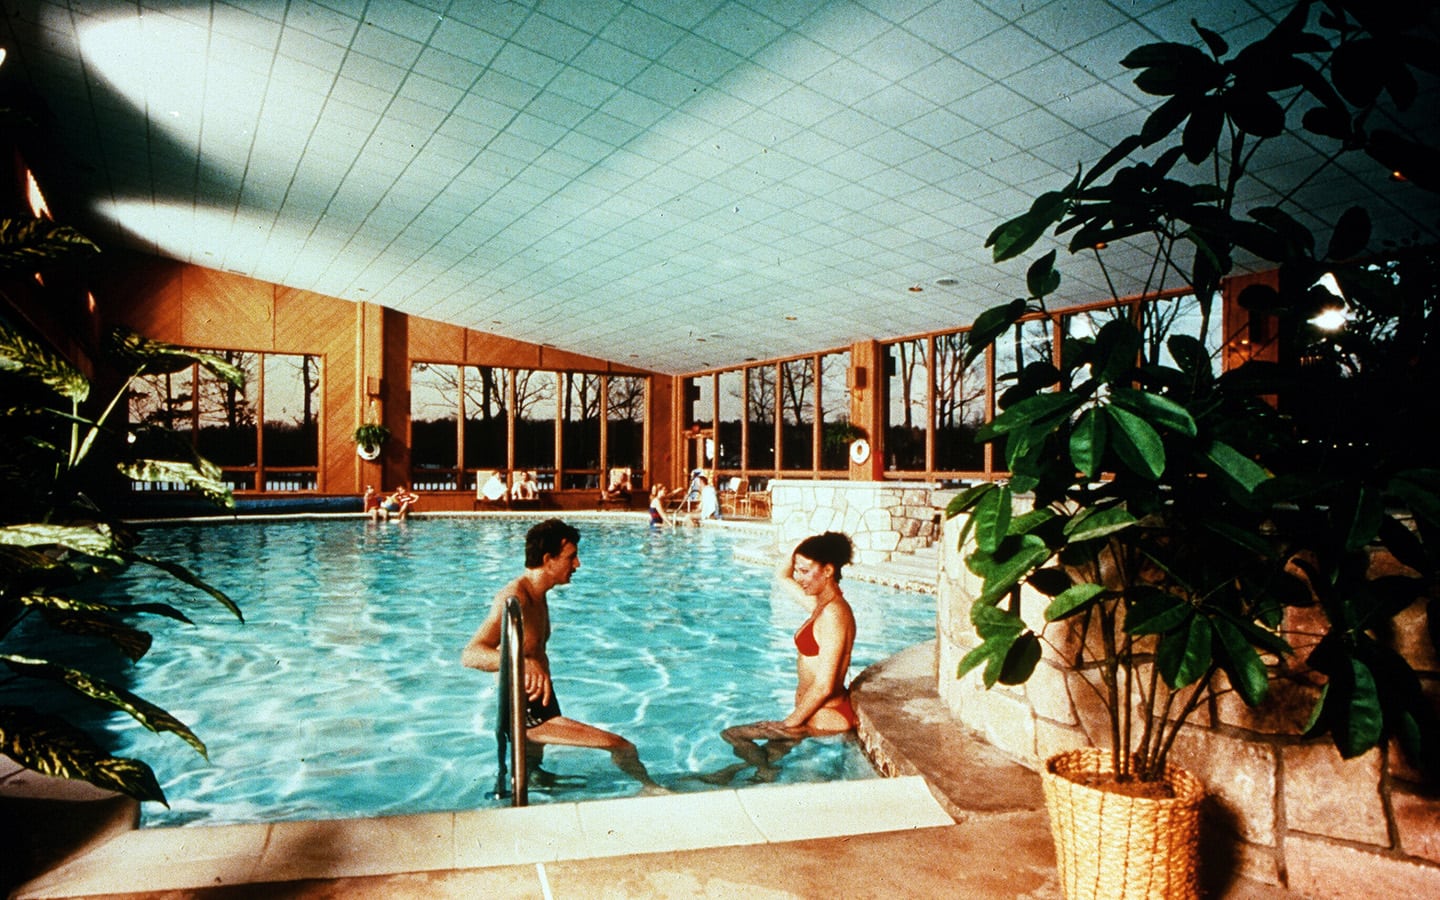 Man and woman standing in the indoor pool